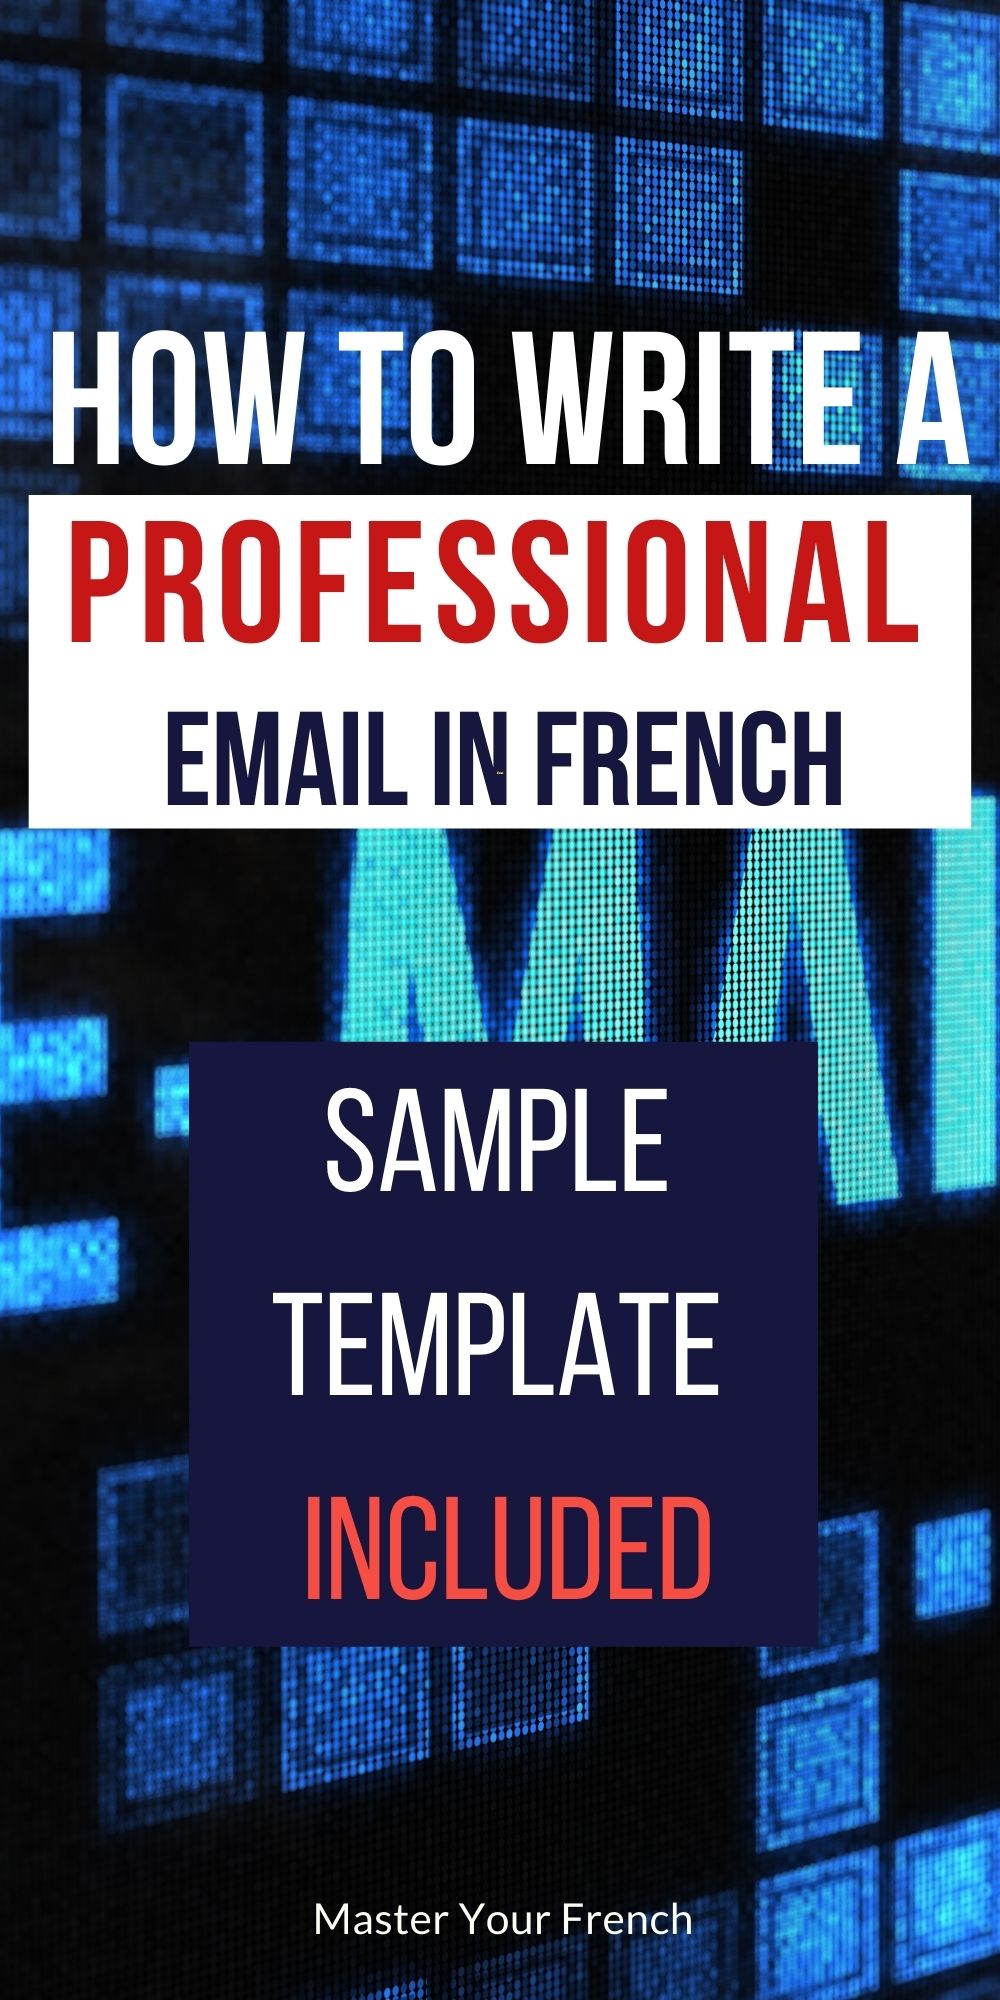 Writing a Professional Email in French (Sample template included